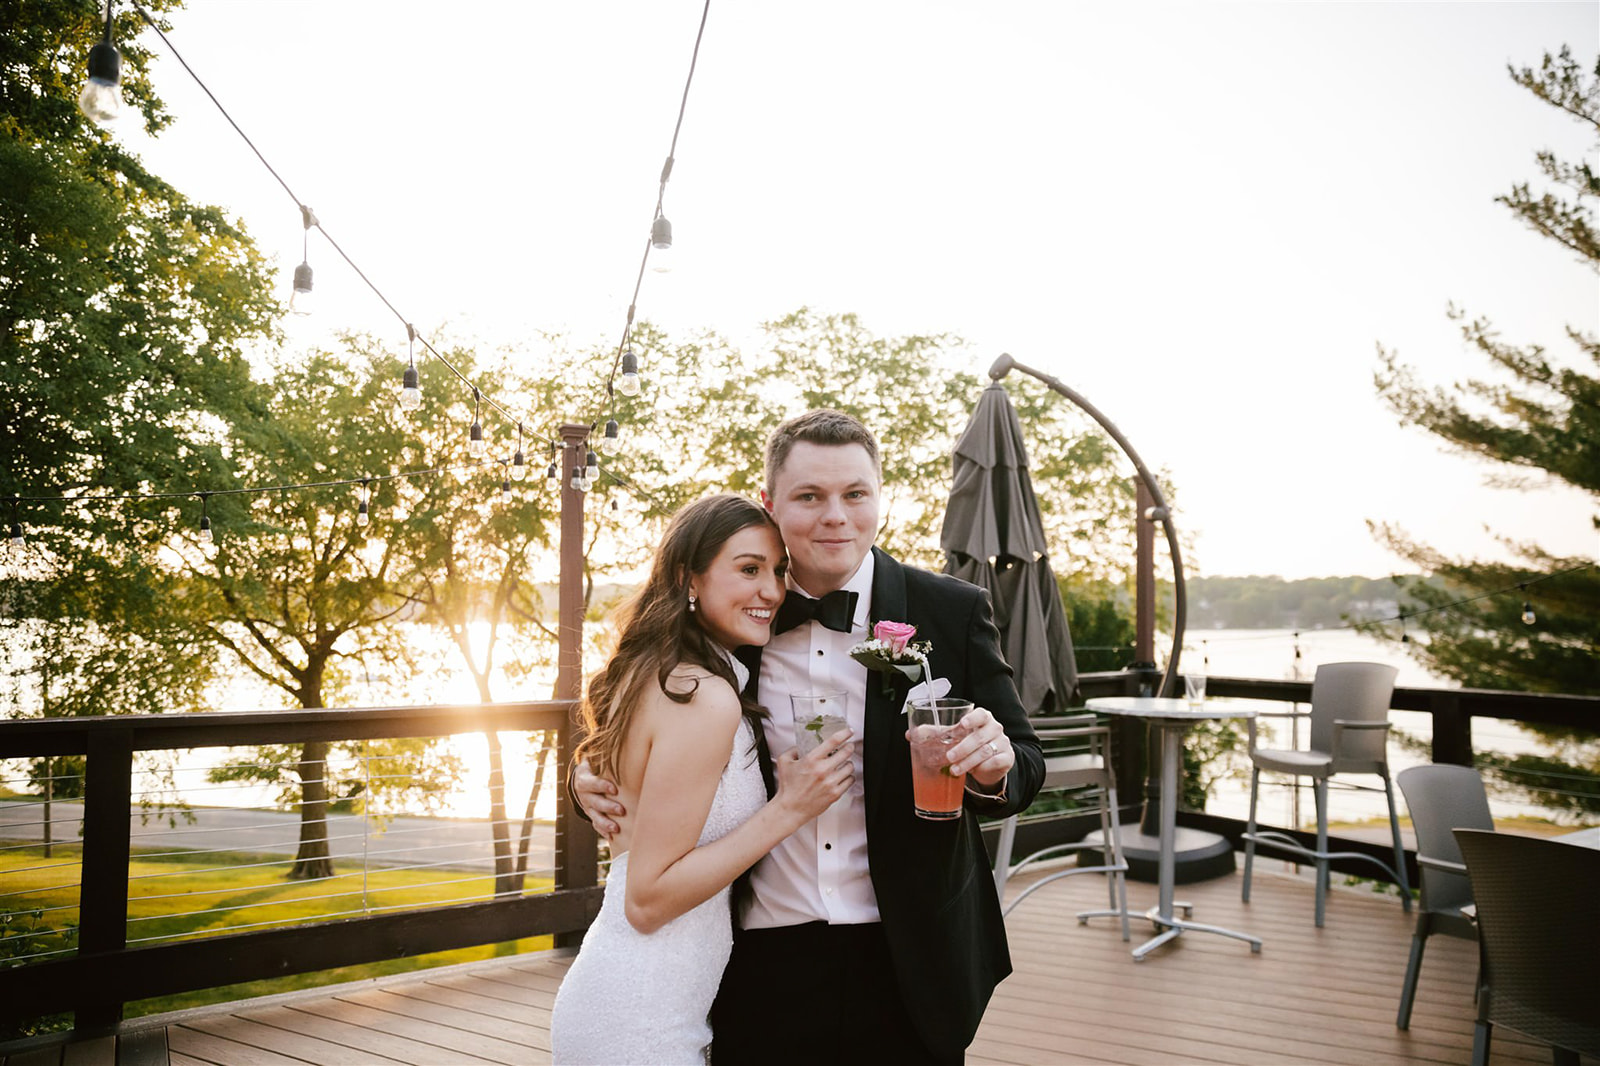 A captivating moment captured as the couple raises their glasses in a heartfelt toast against the backdrop of a stunning